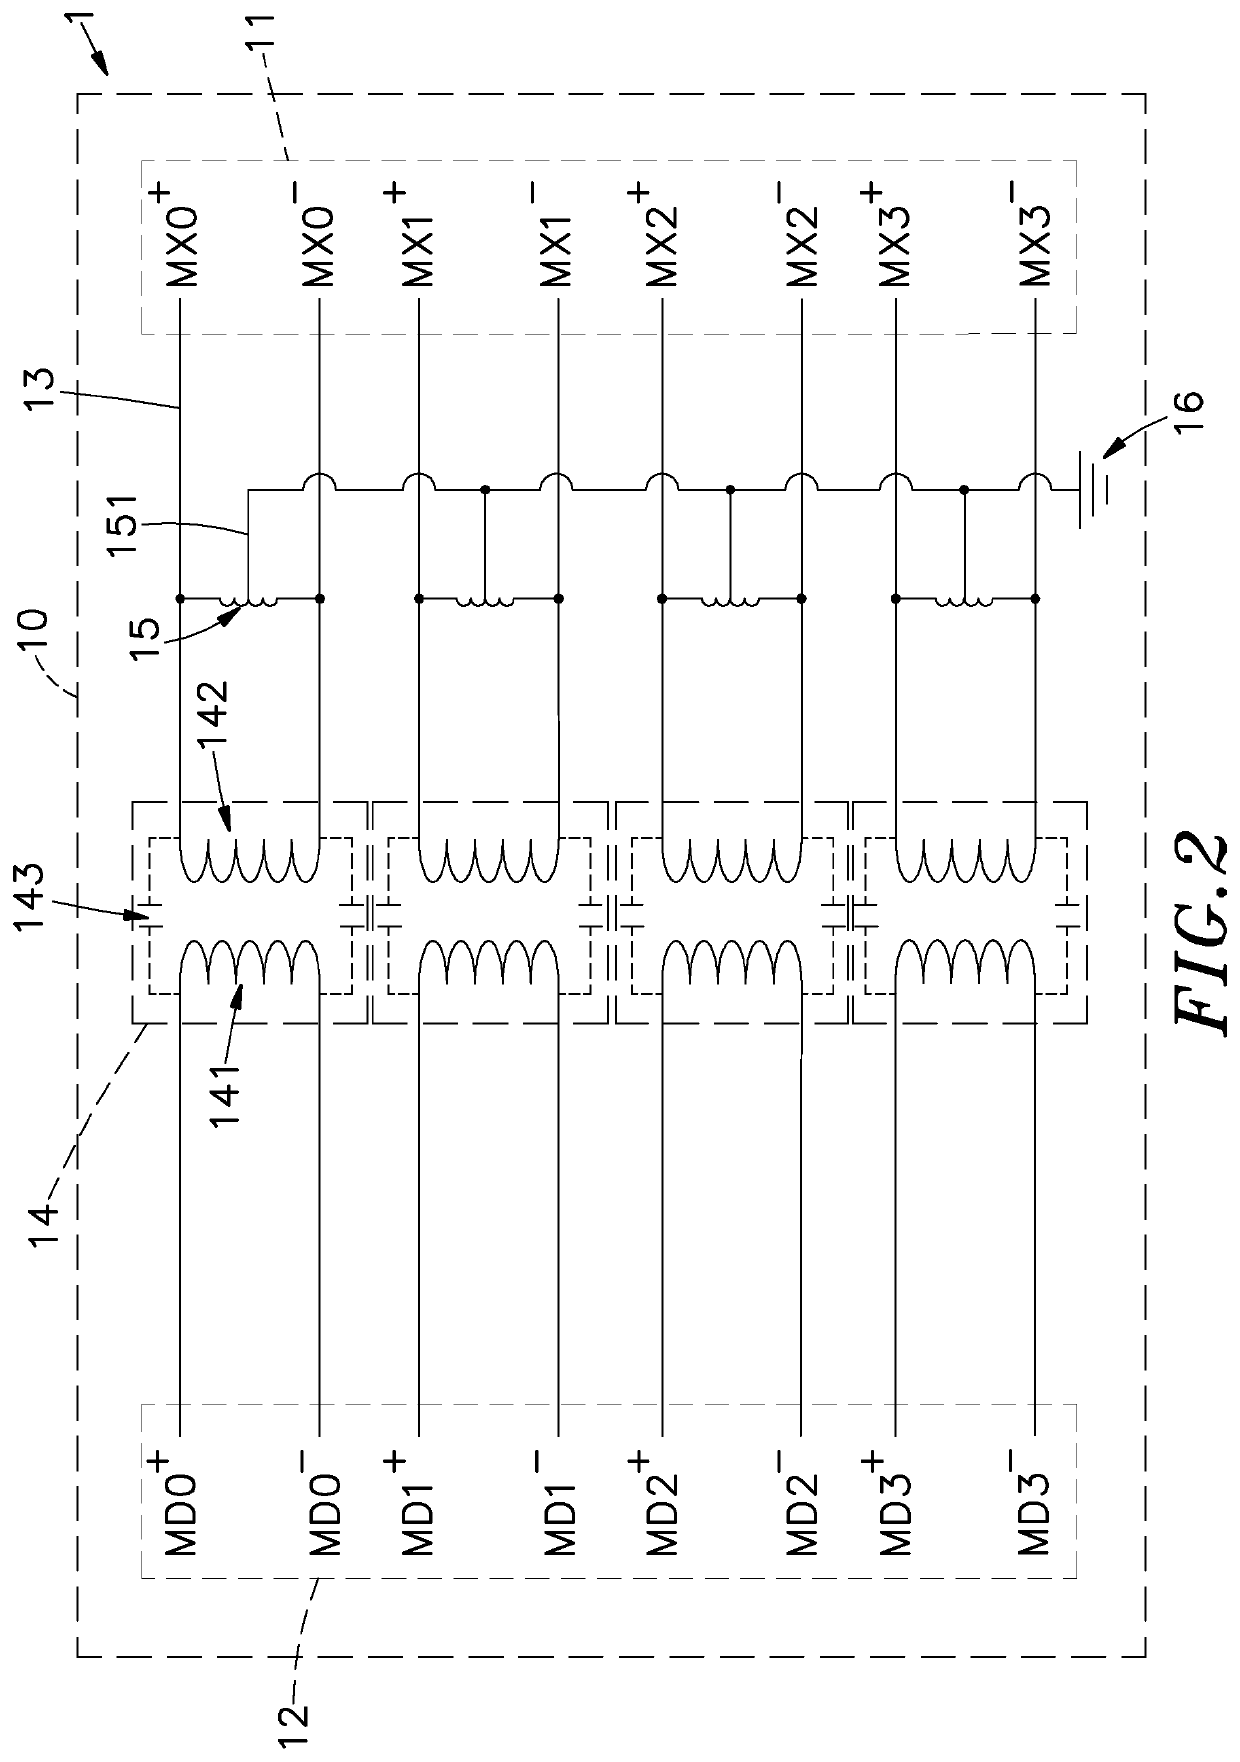 High-capacity common-mode inductor processing circuit for network signal